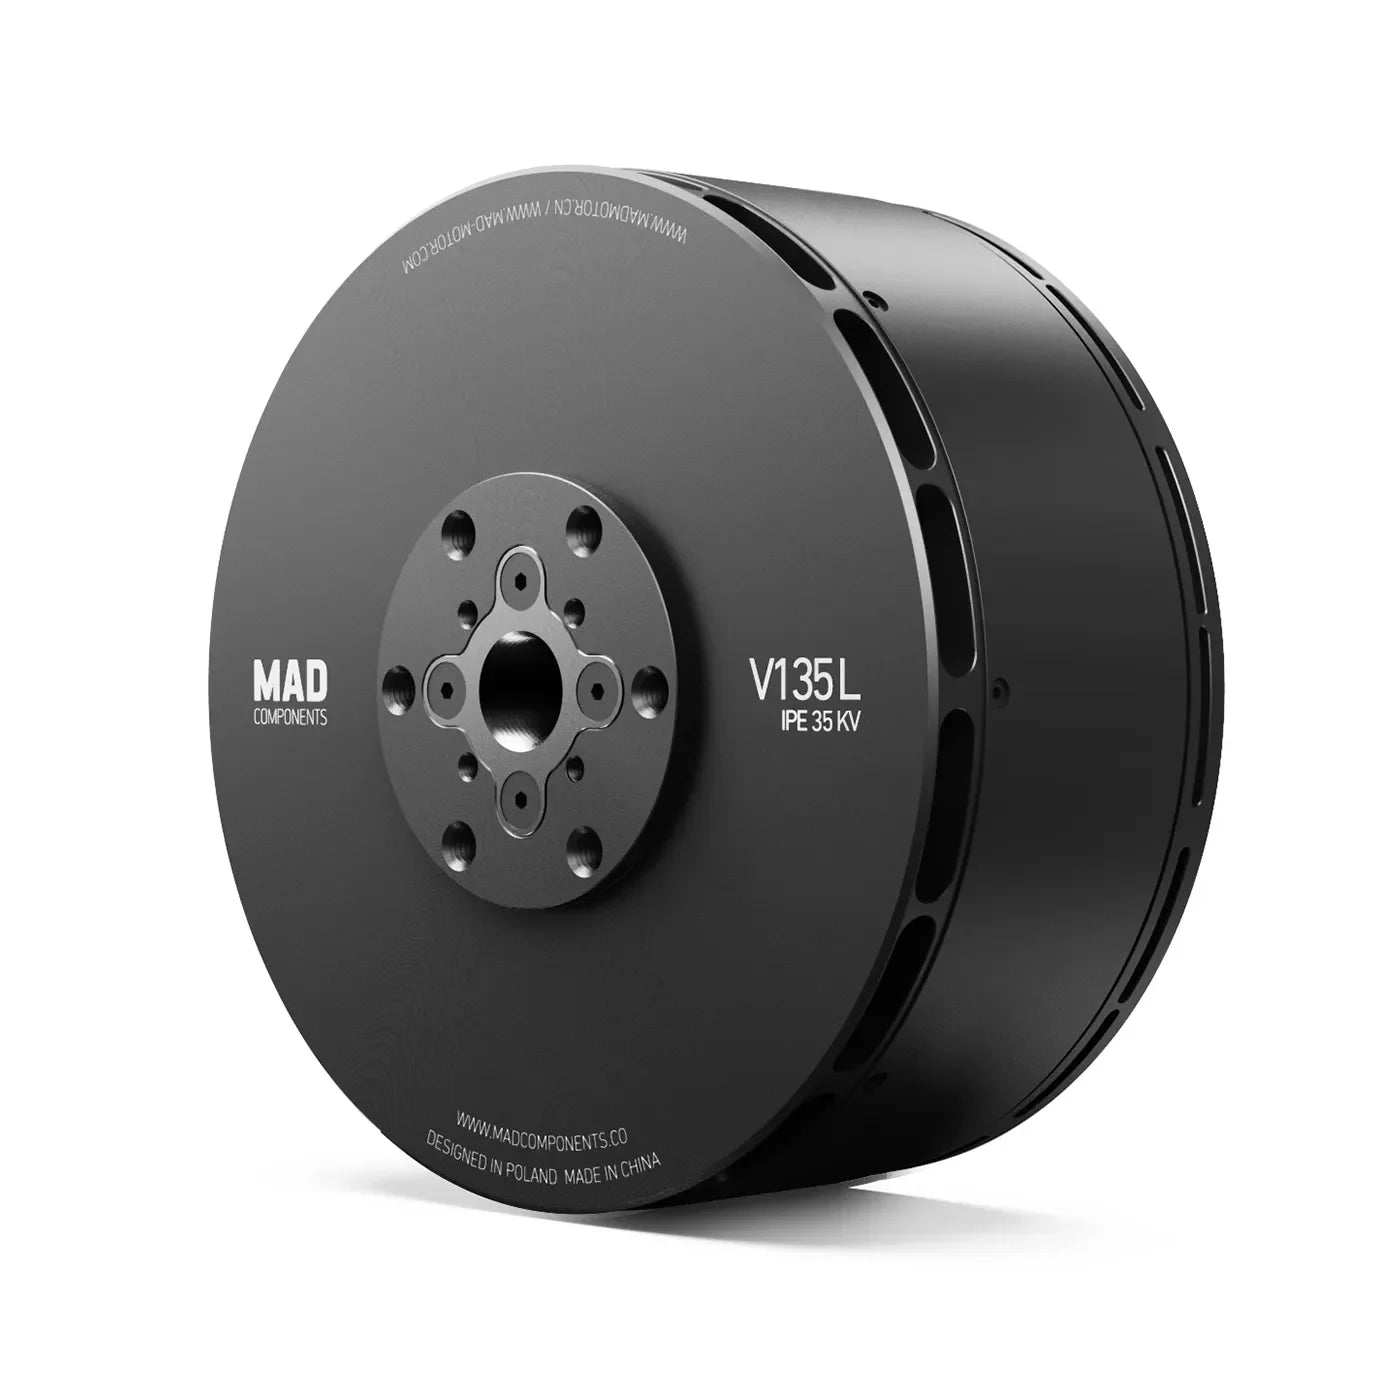 MAD V135L IPE VTOL Motor, High-performance brushless motor for eVTOL aircraft with 35KV output, made in Poland and China.